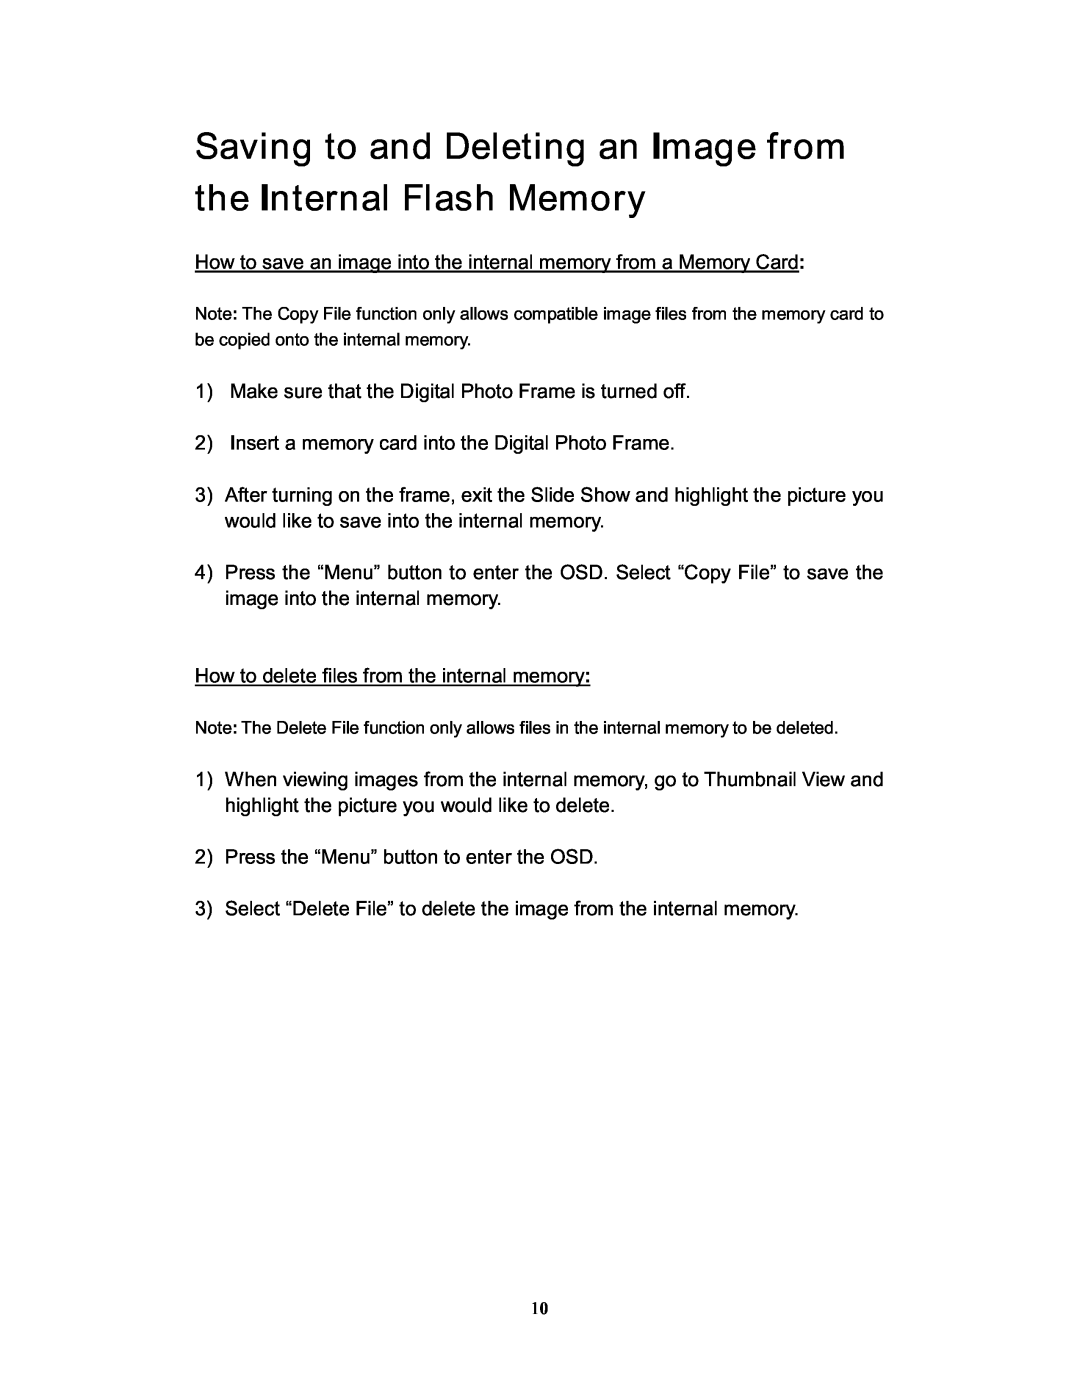 Westinghouse DPF-1021 user manual Saving to and Deleting an Image from the Internal Flash Memory 